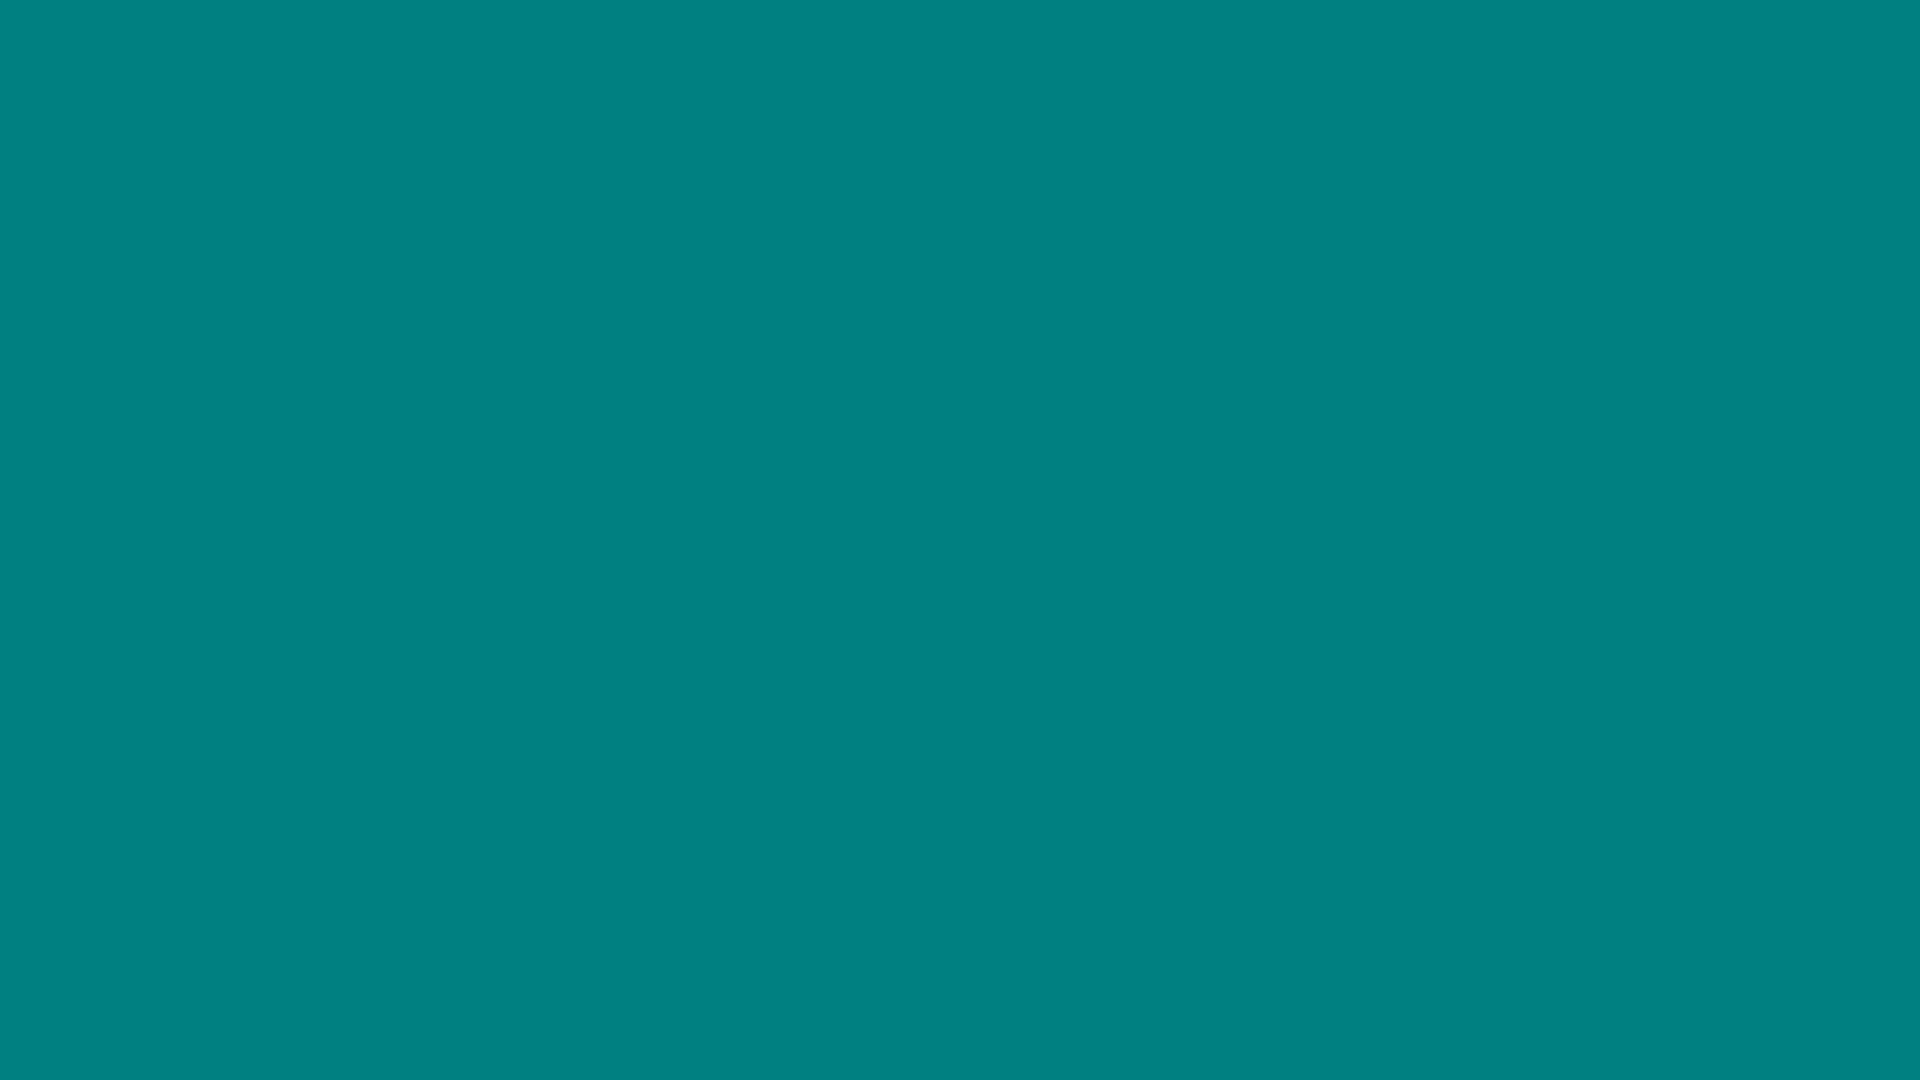 1920x1080 Teal Solid Color Background